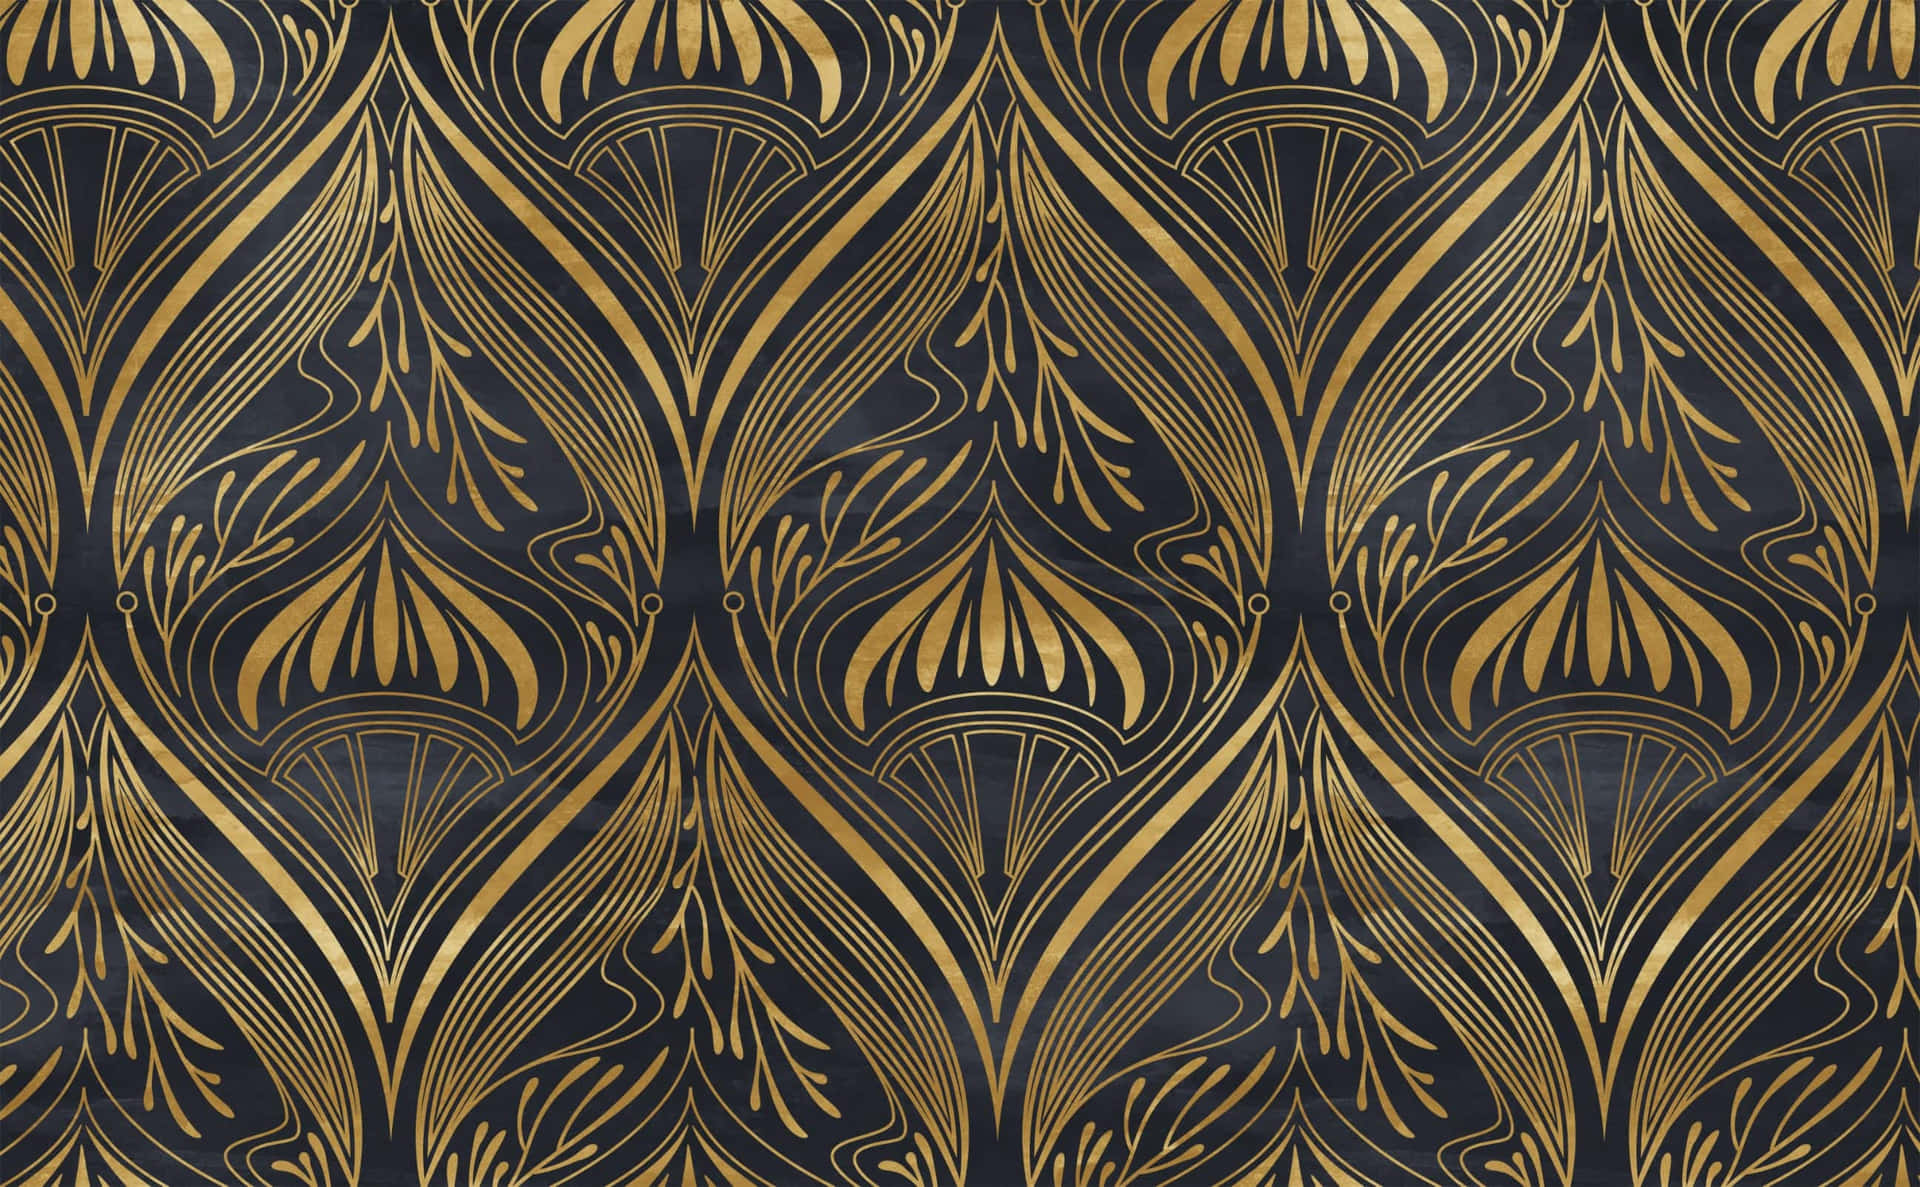 A Gold And Black Wallpaper With A Floral Pattern Wallpaper